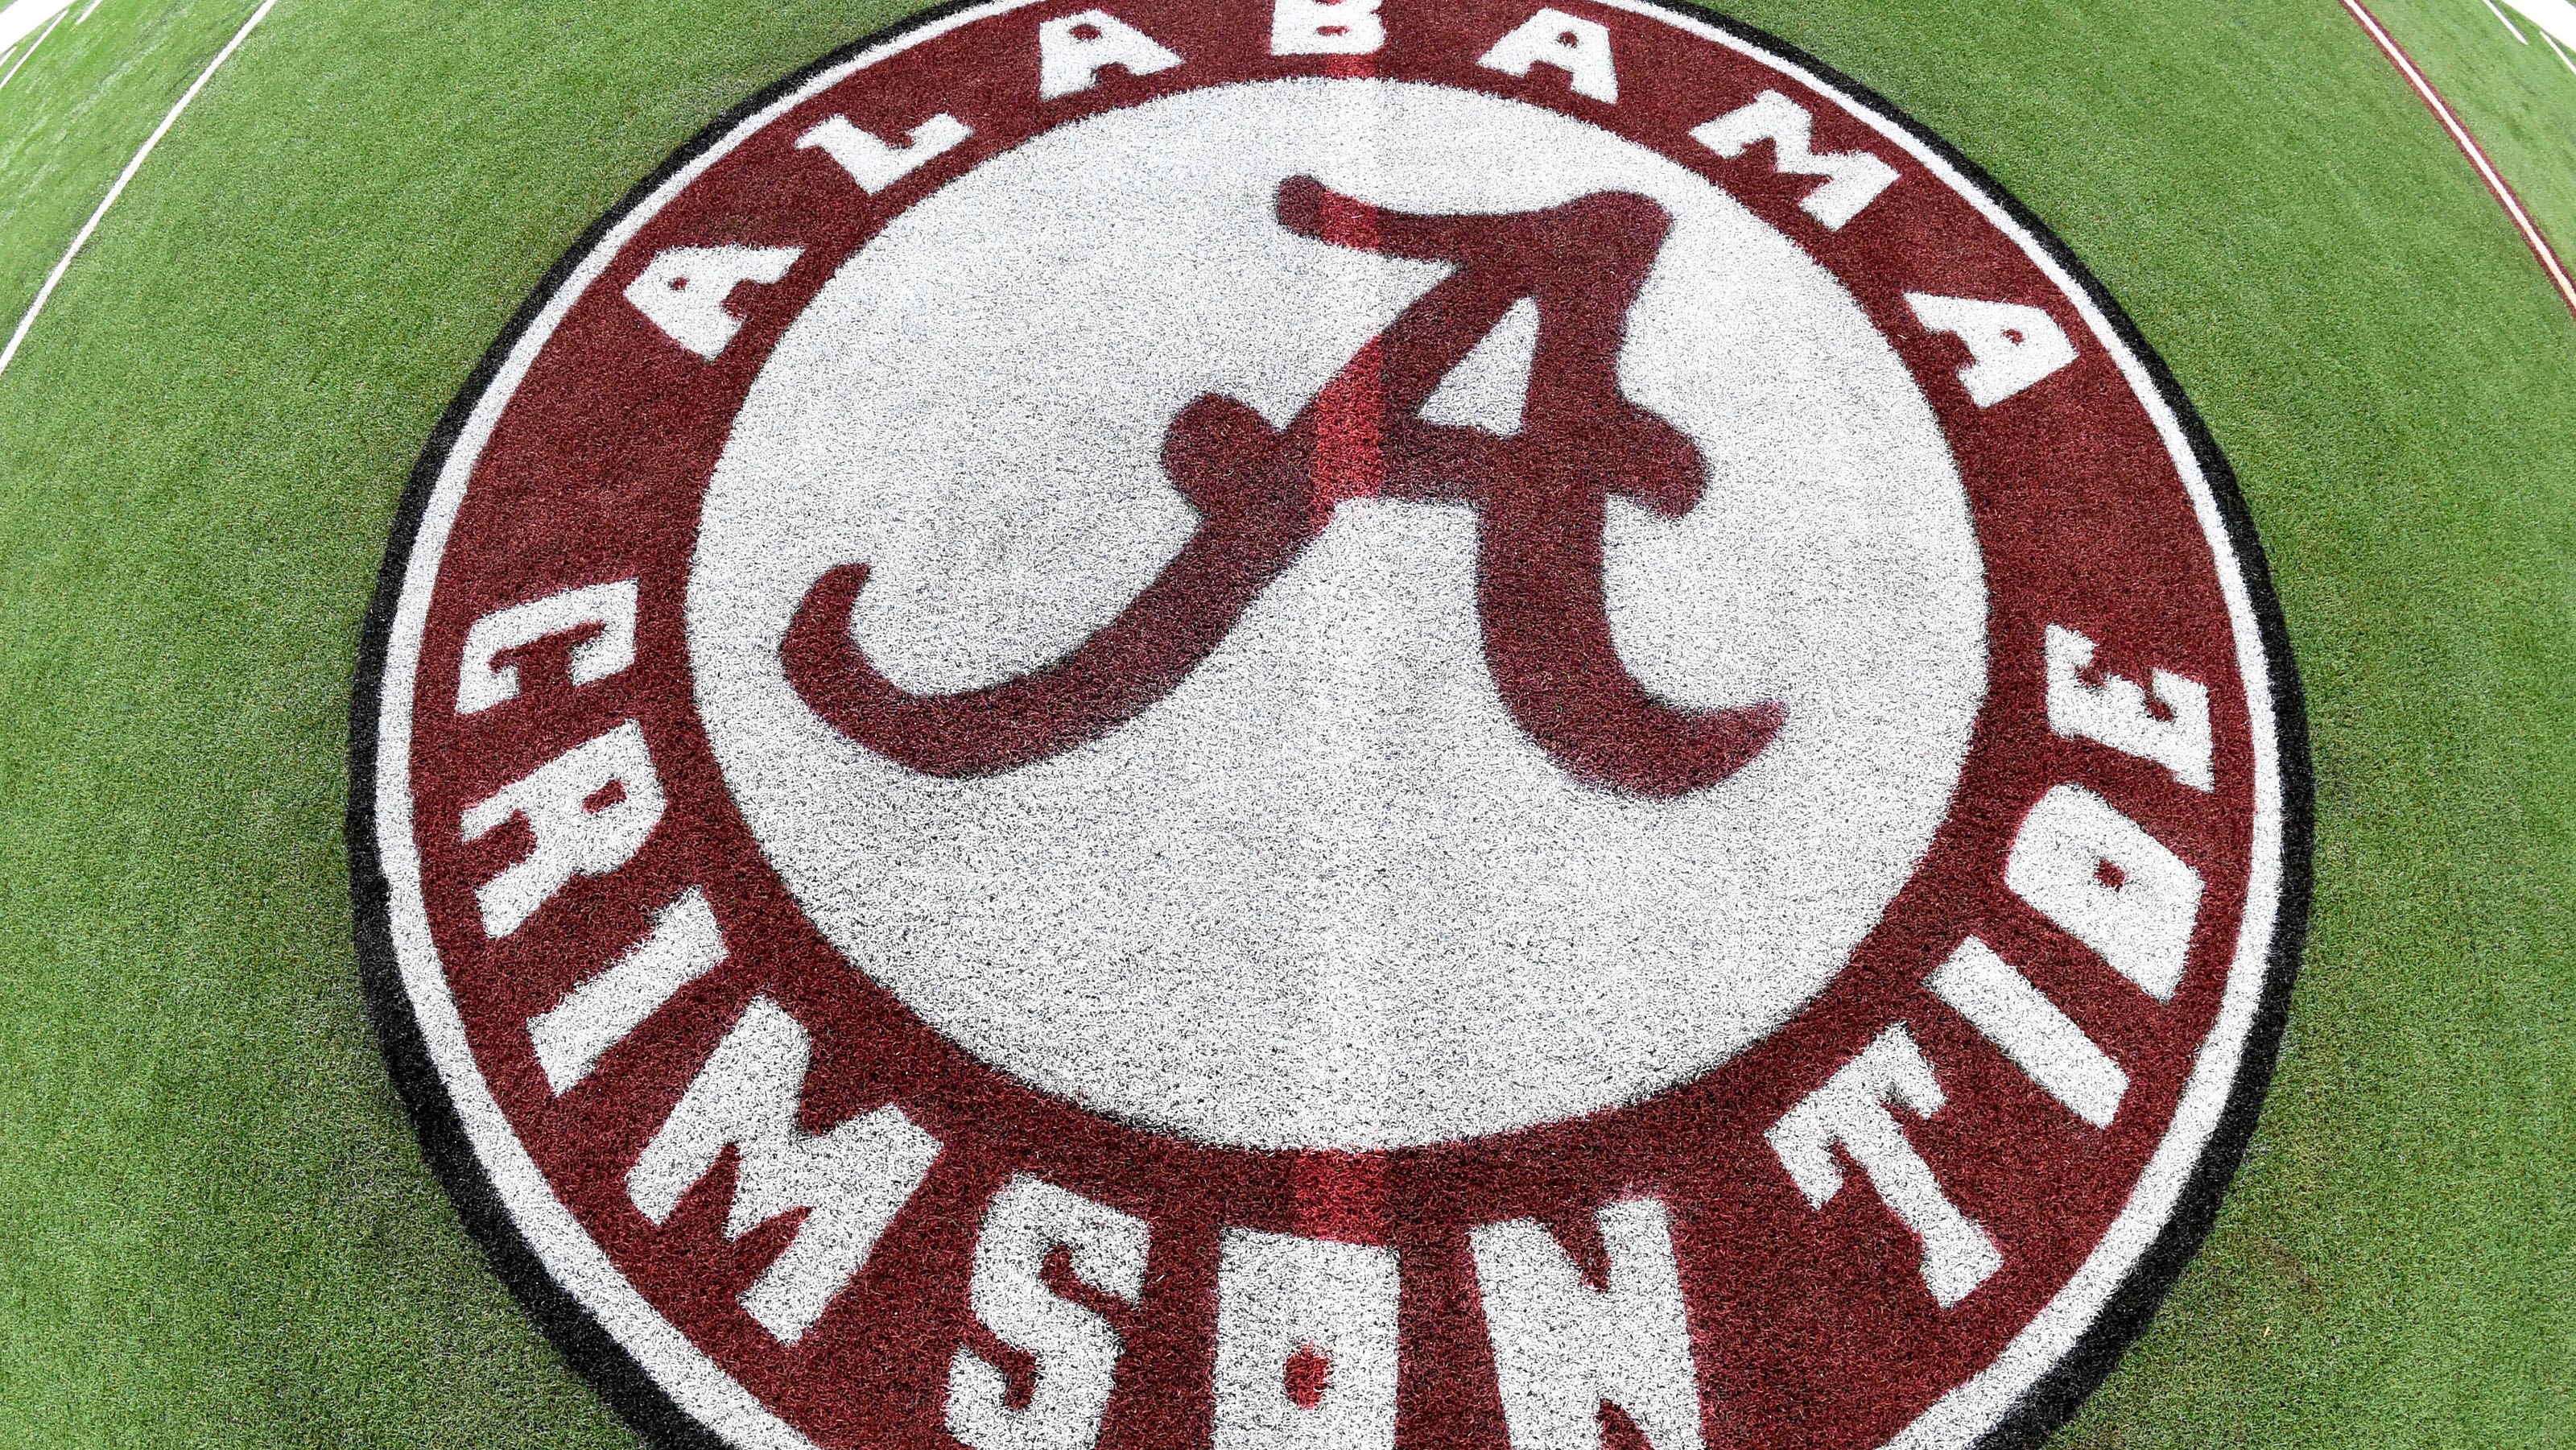 Four-star Class of 2025 athlete announces decommitment from Alabama football